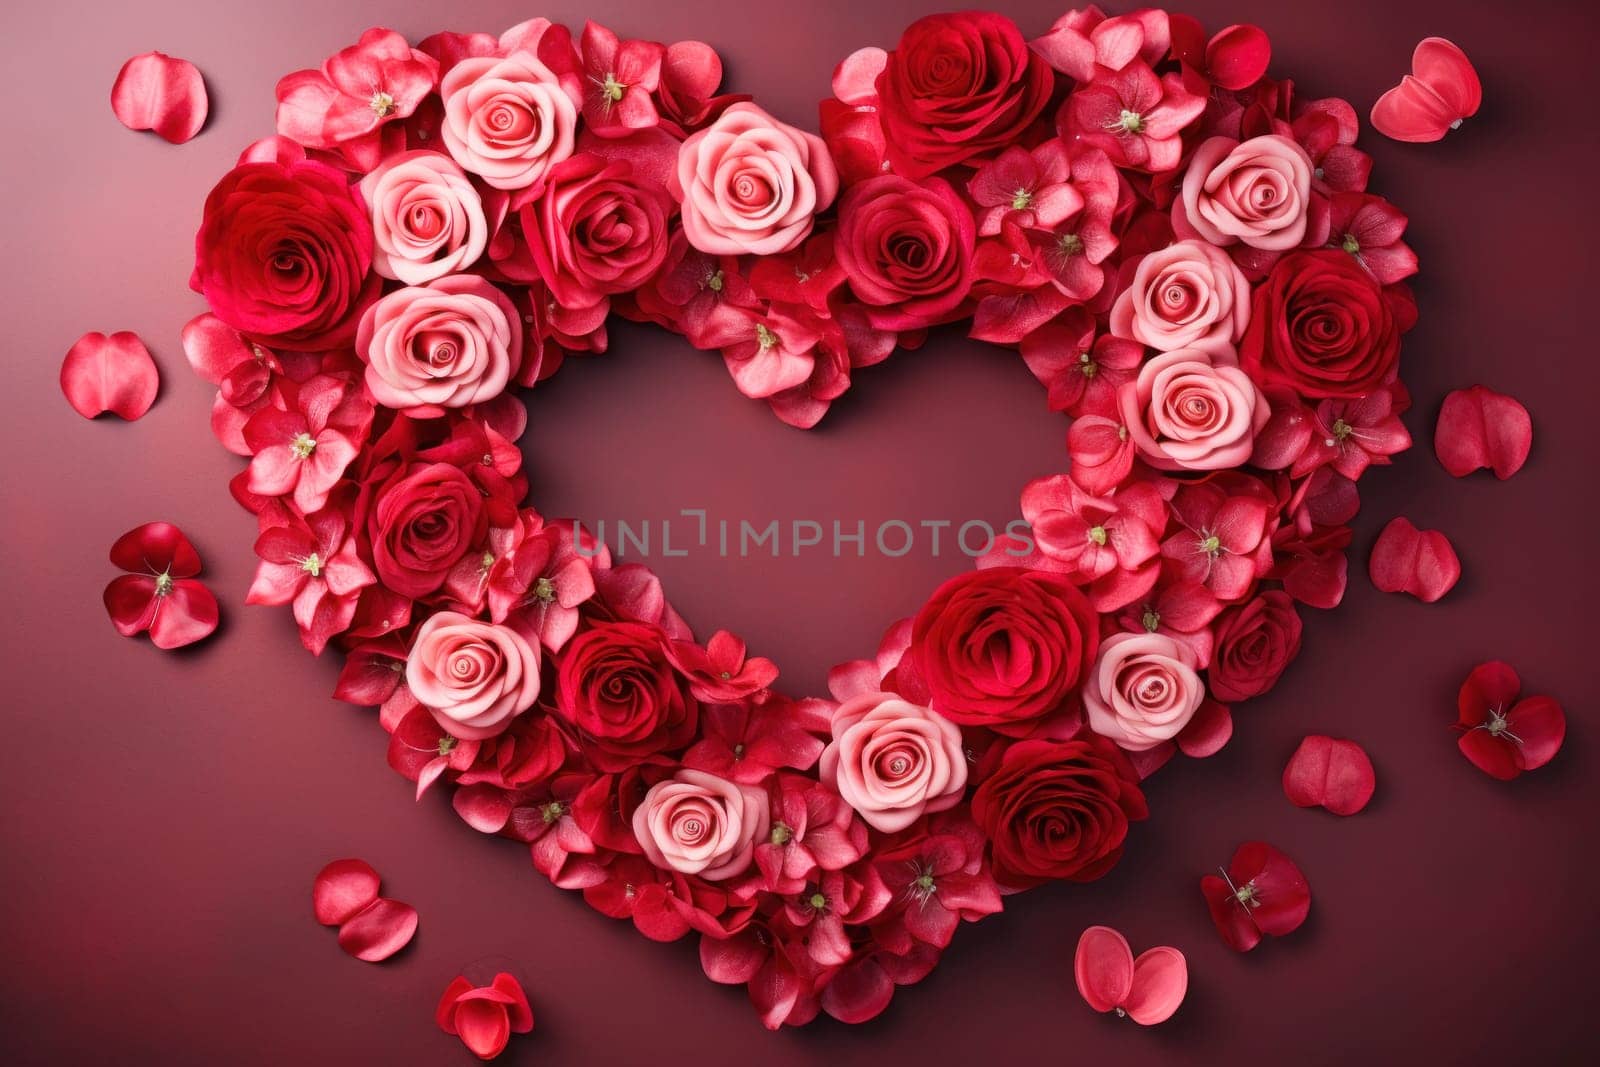 Rose flowers arranged in shape of heart, creating romantic floral masterpiece by andreyz